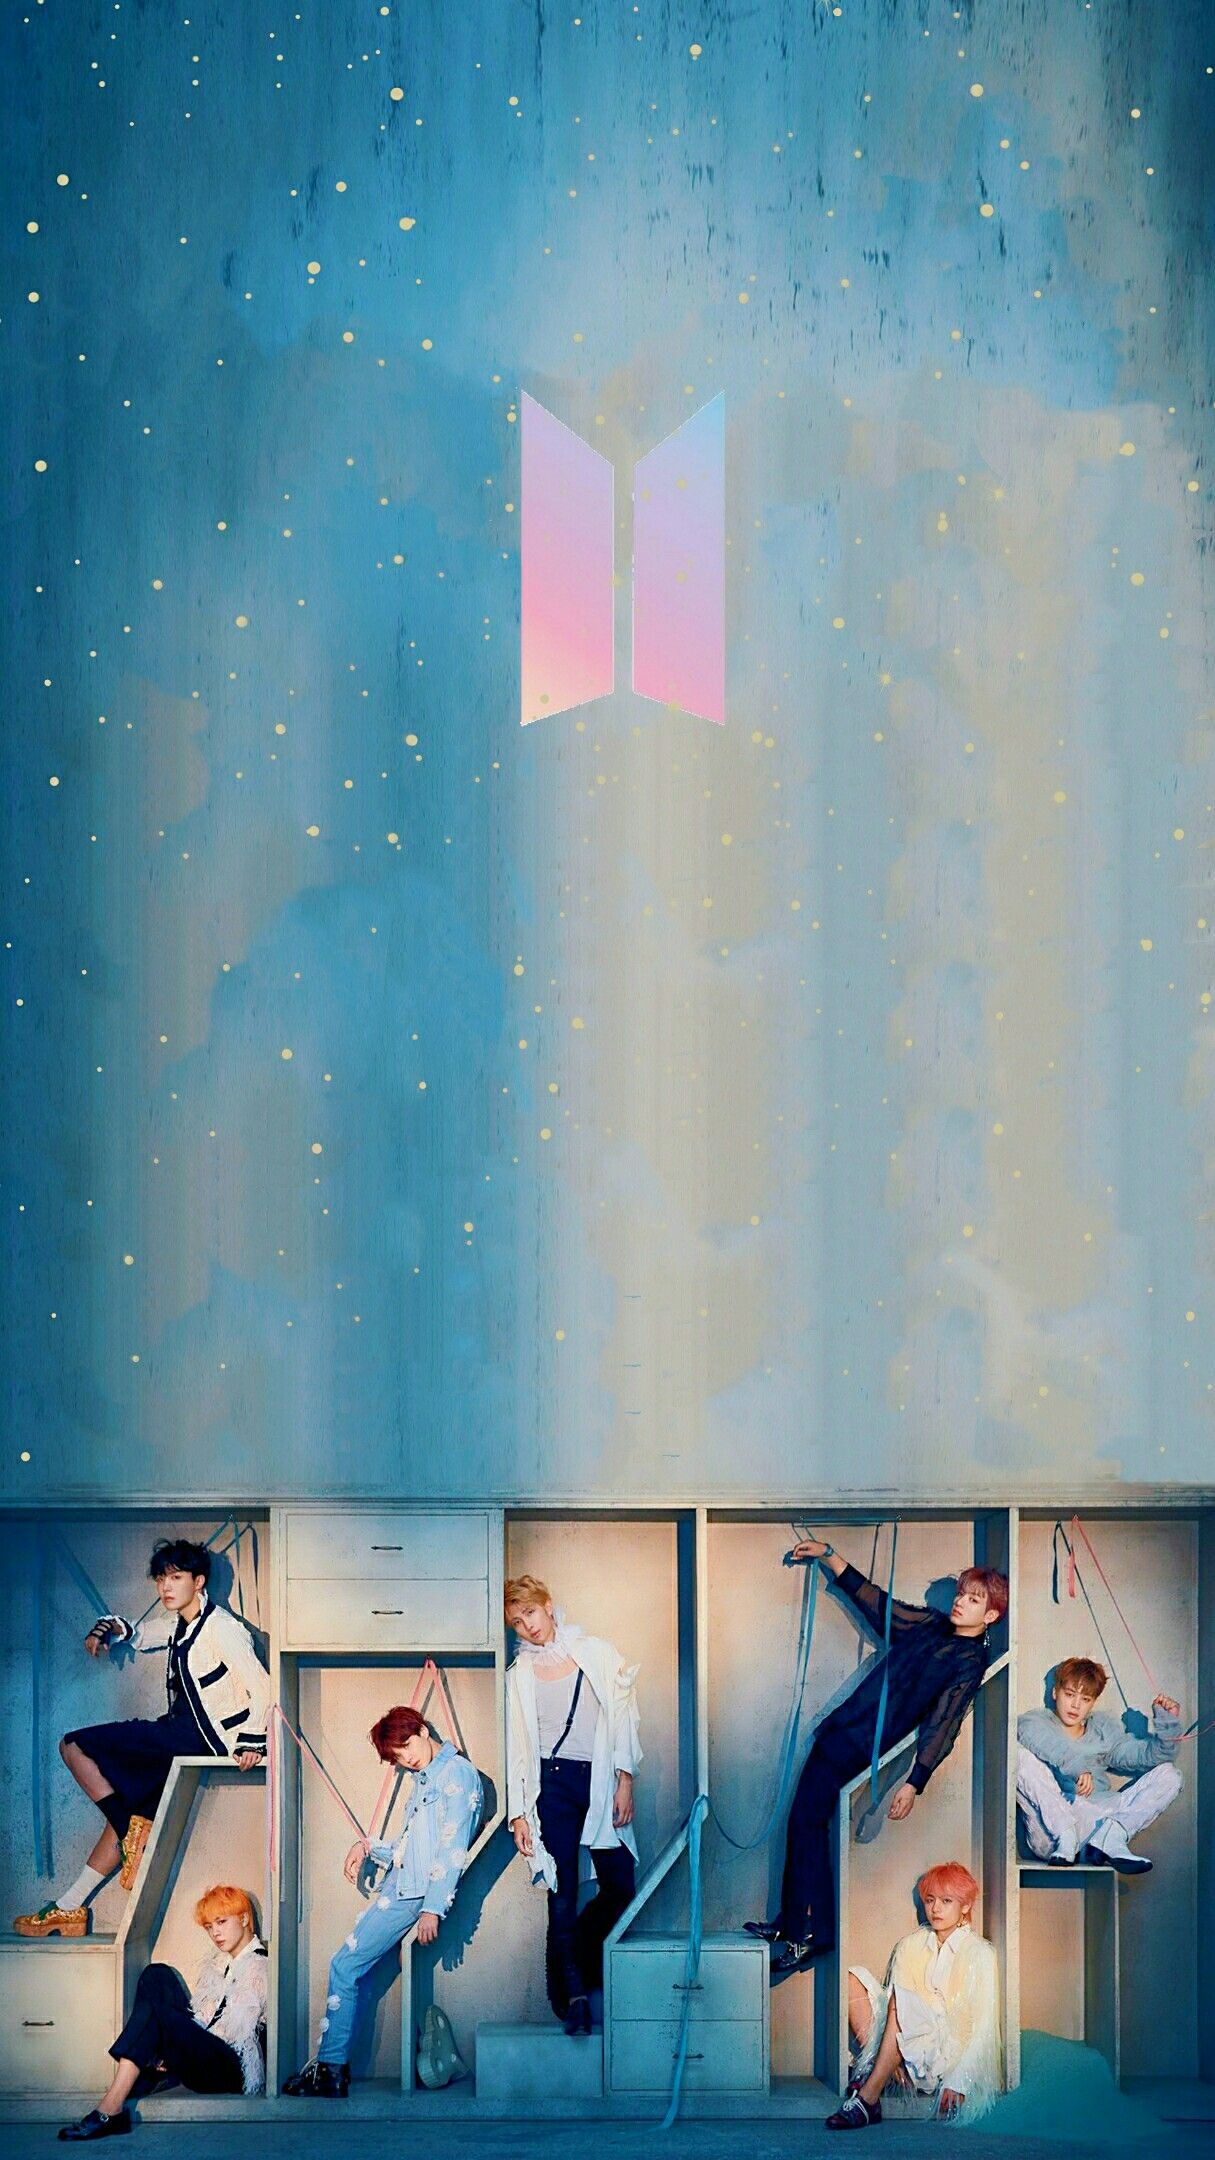 Bts Love Yourself Answer Wallpaper